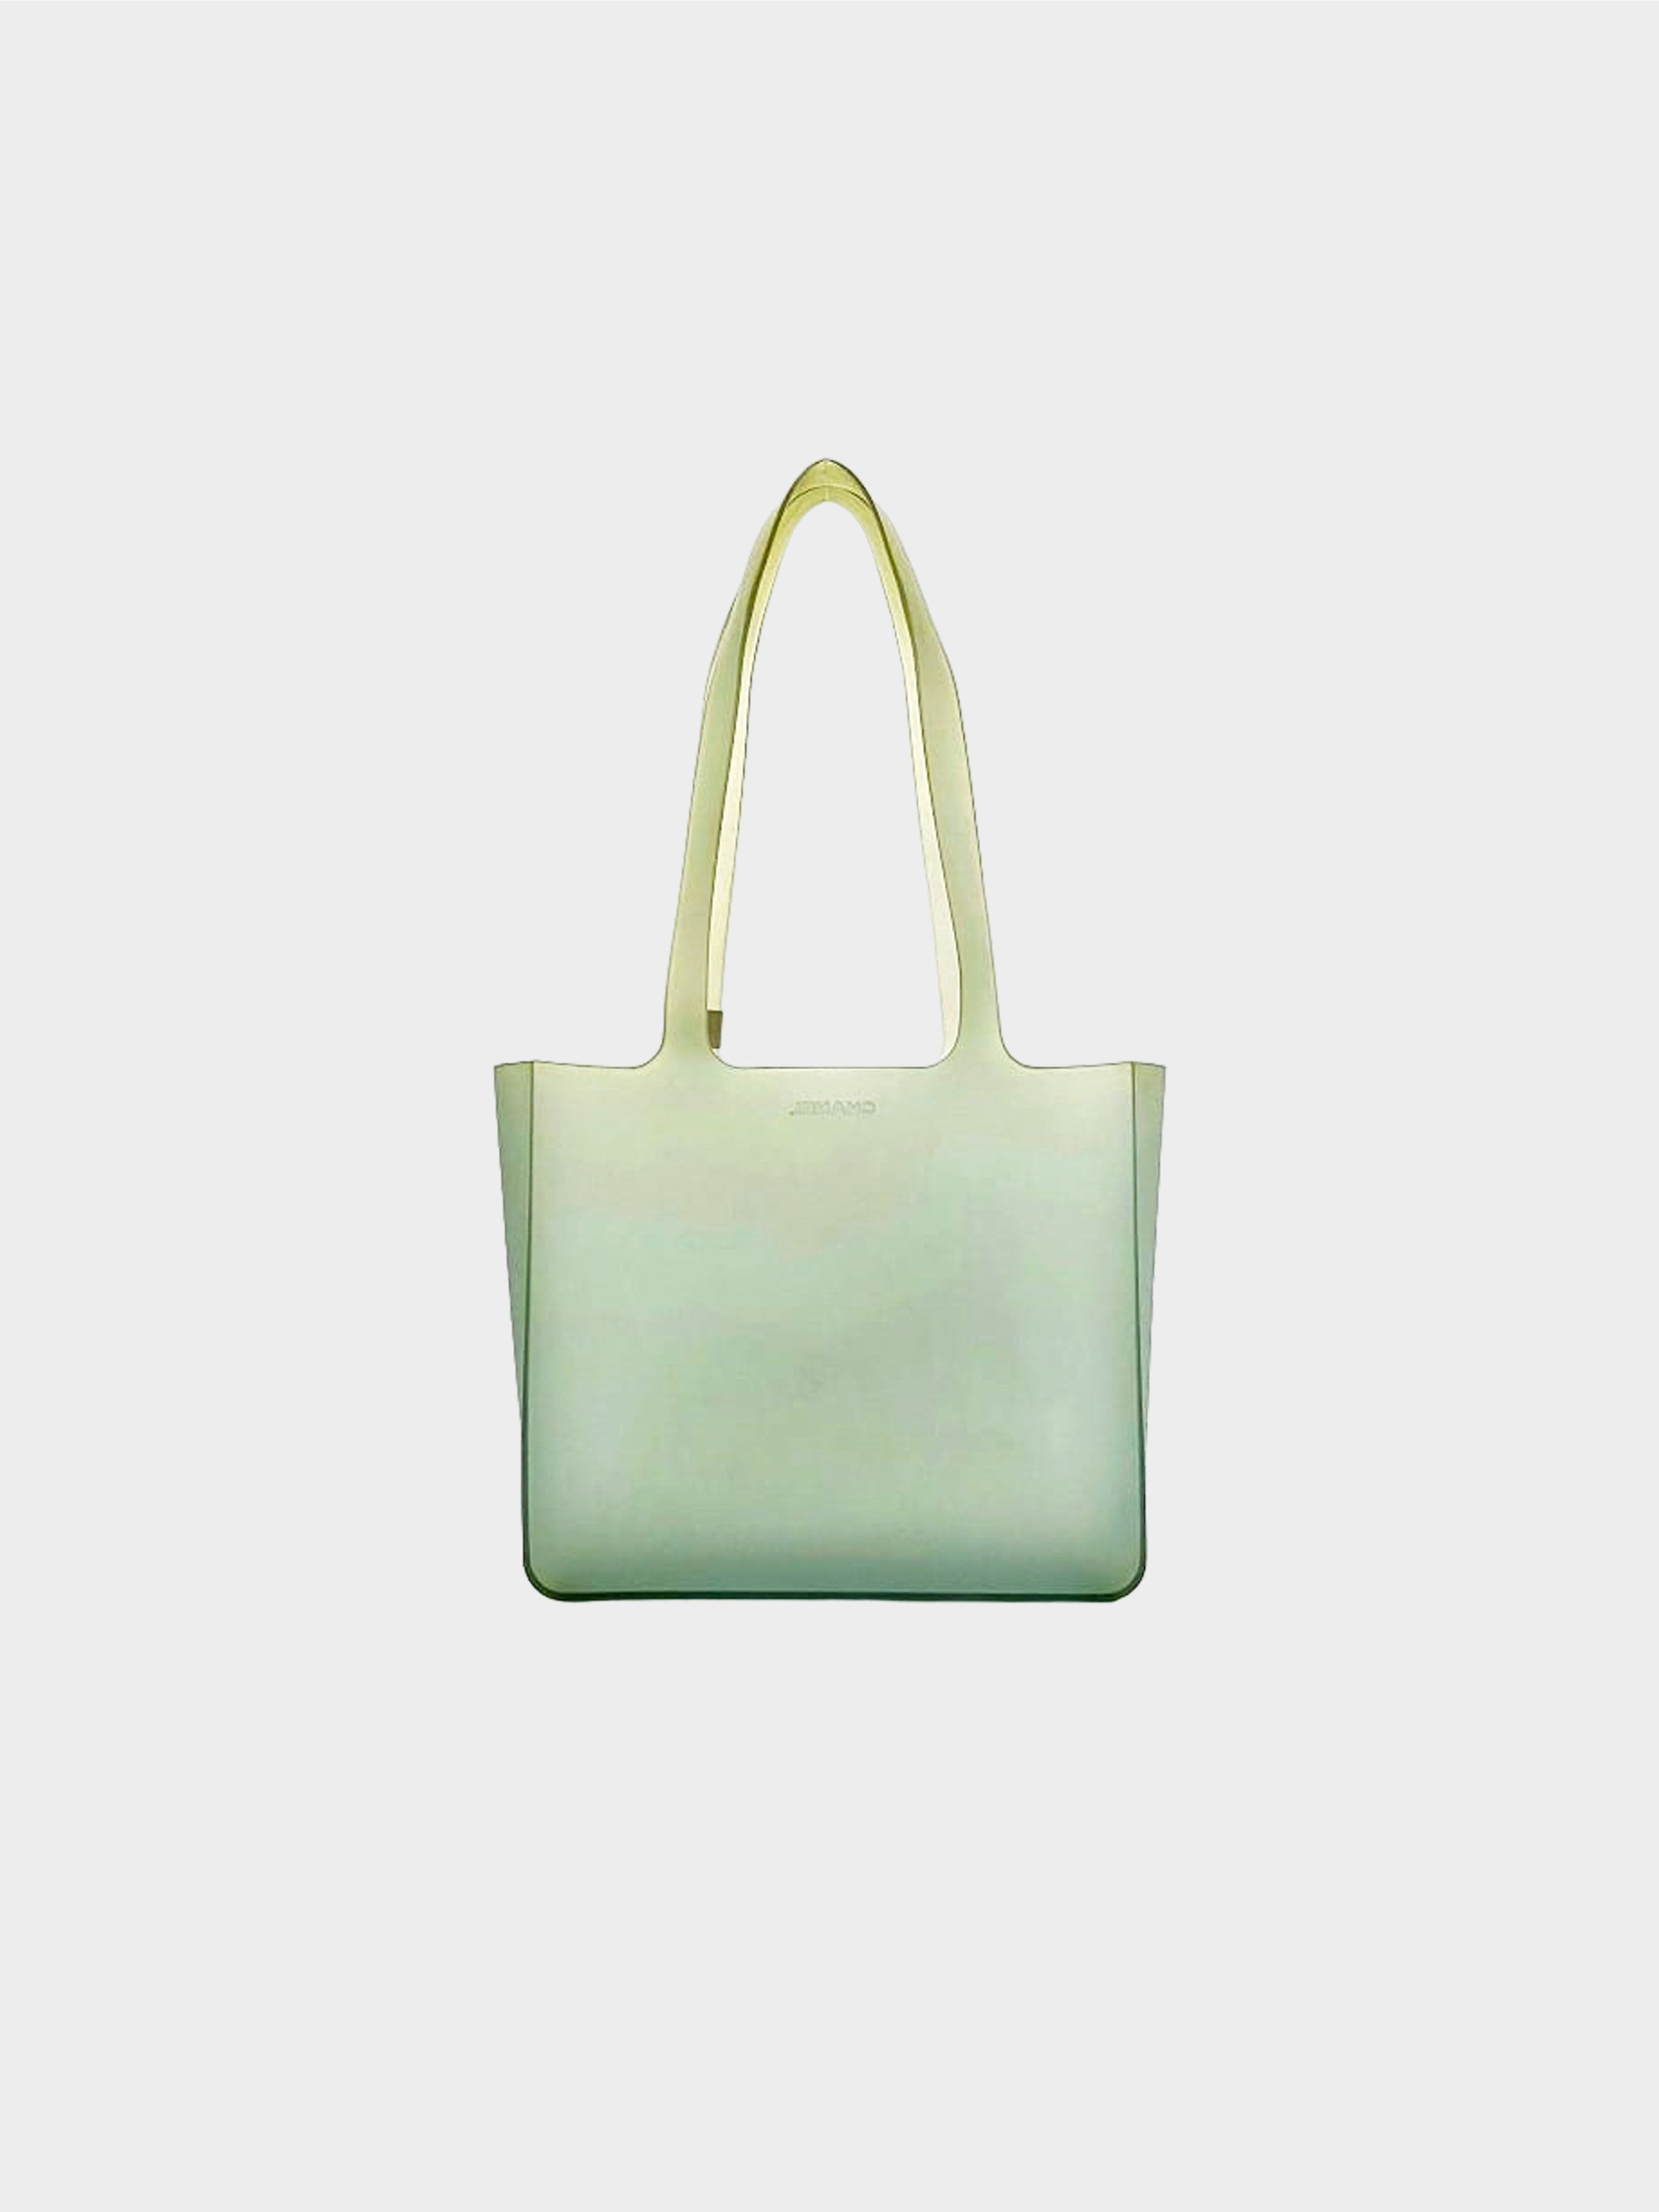 Chanel 2000s Green Jelly Rubber Tote